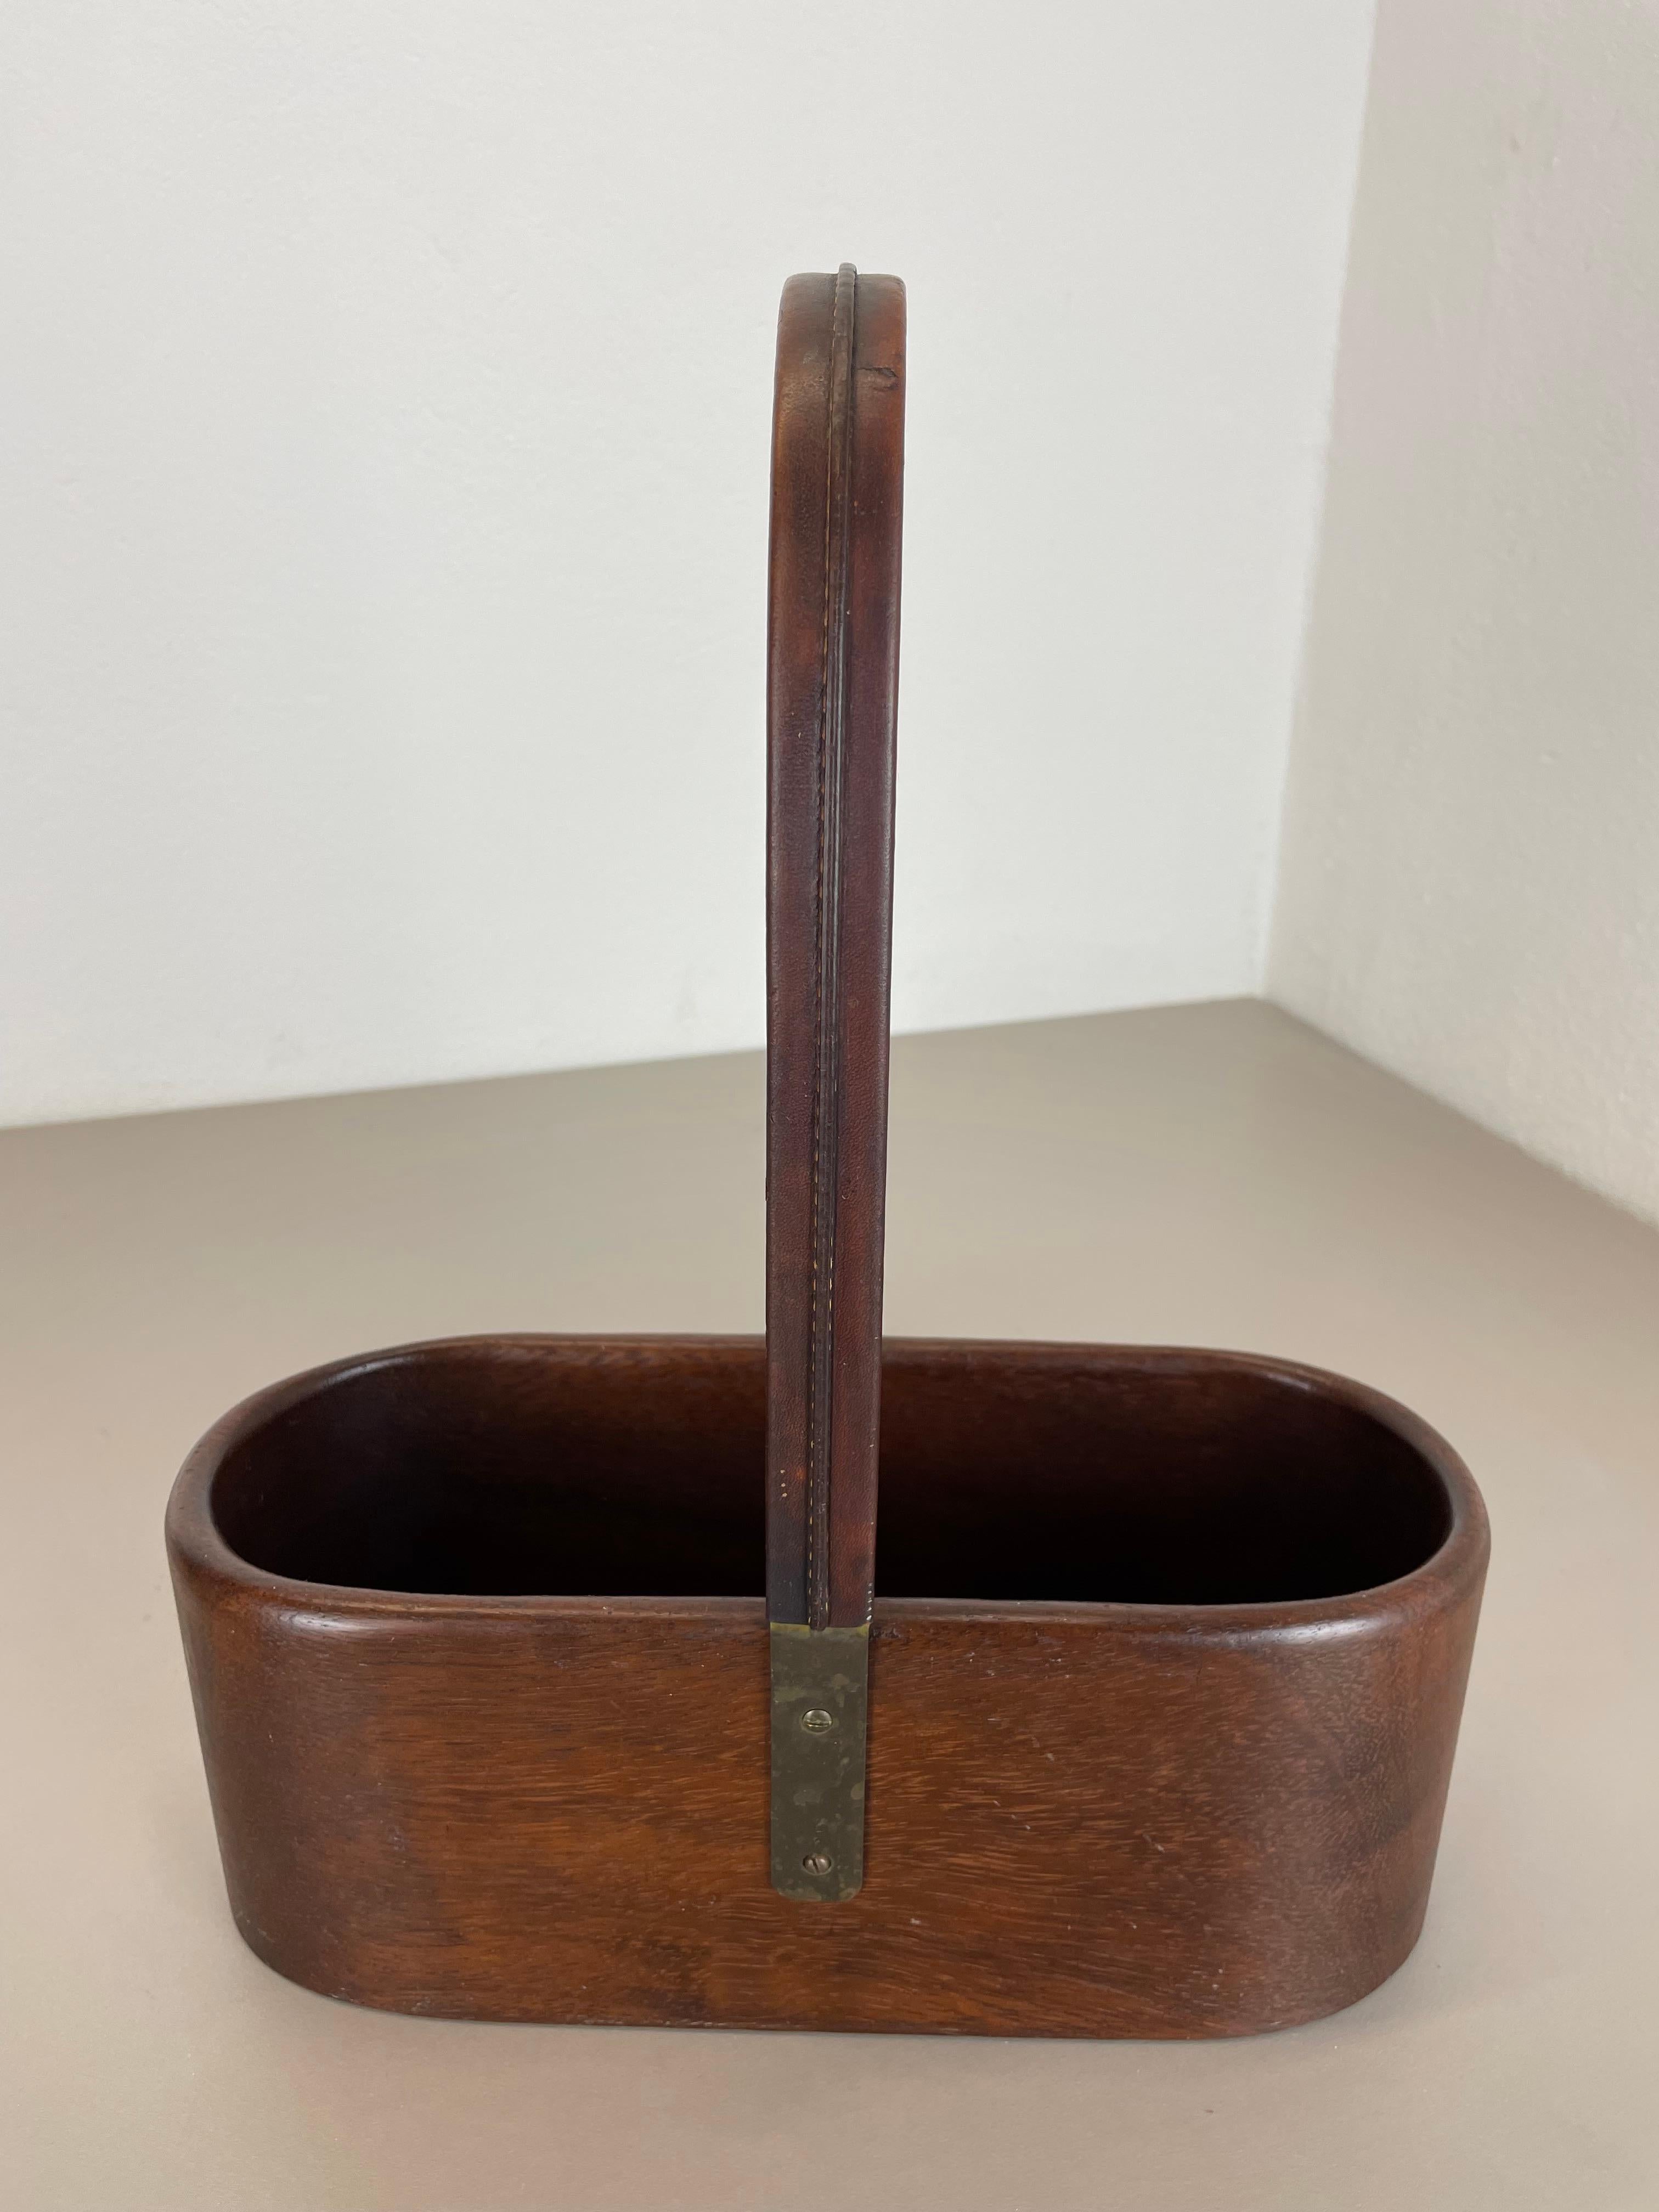 Teak Bottle Holder with Brass and Leather Handle by Carl Auböck, Austria, 1950s For Sale 7